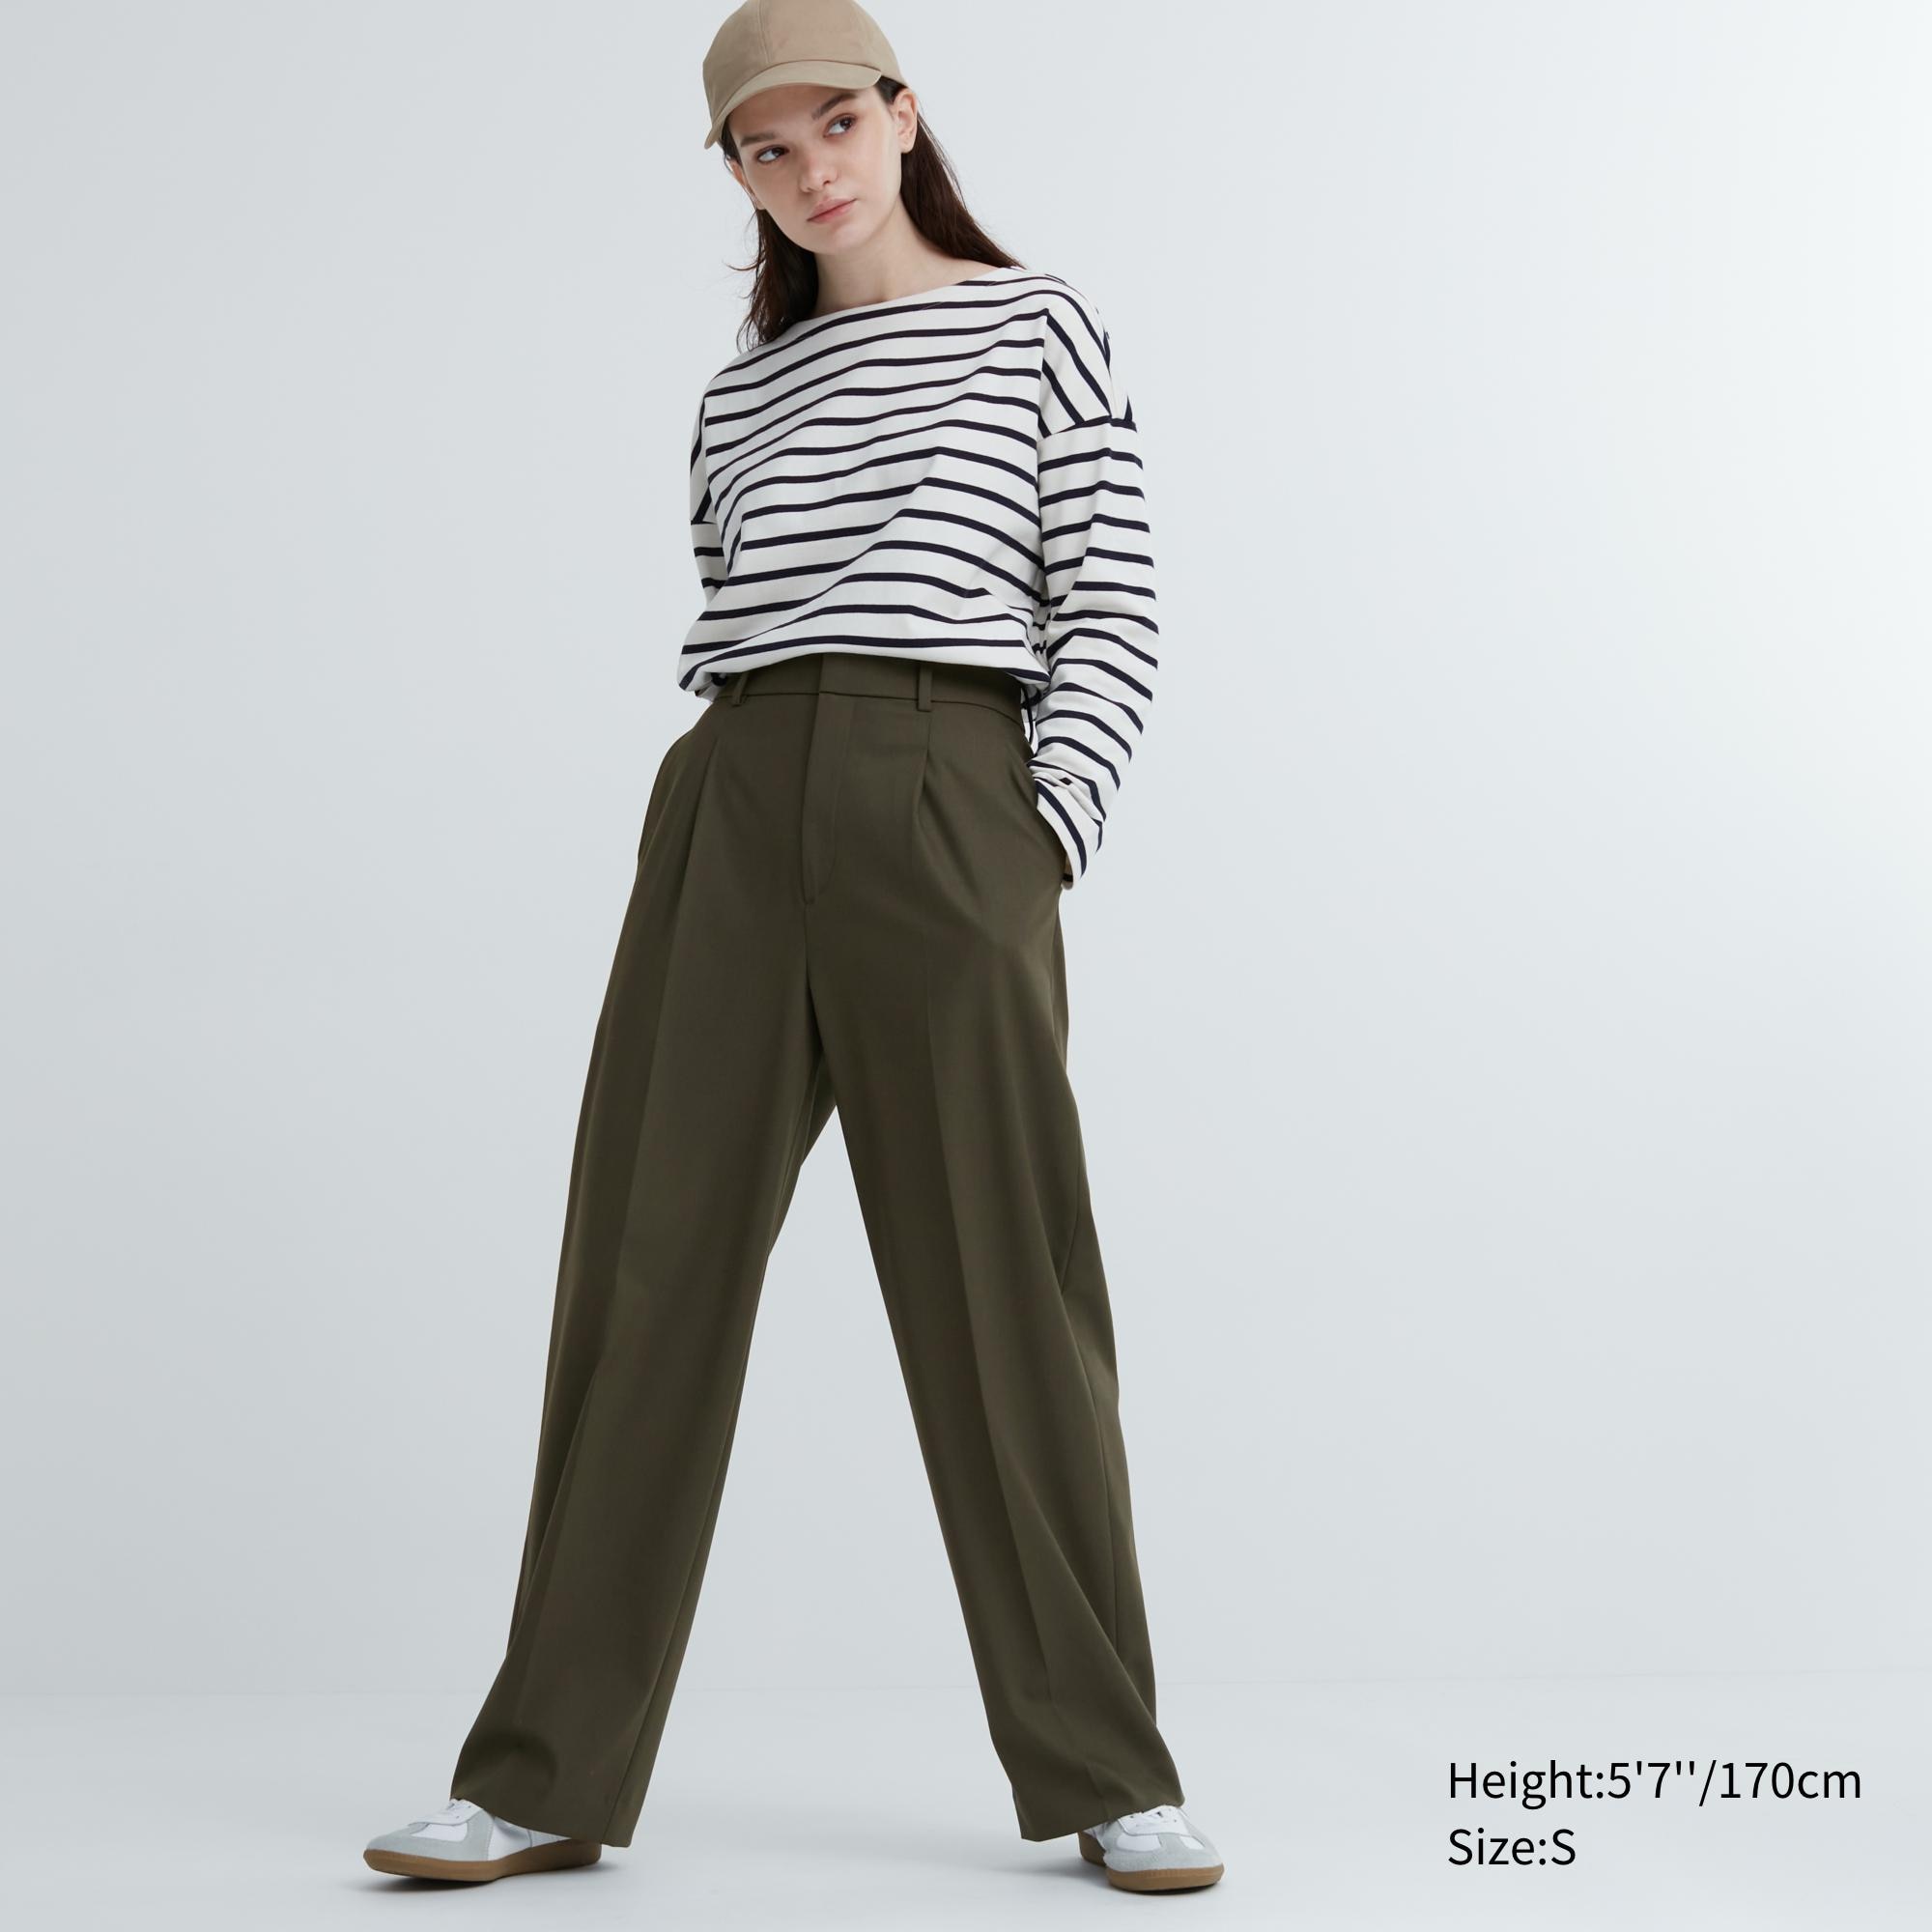 Shop looks for「BRUSHED TWILL LONG SLEEVE OVER SHIRT、PLEATED WIDE PANTS」